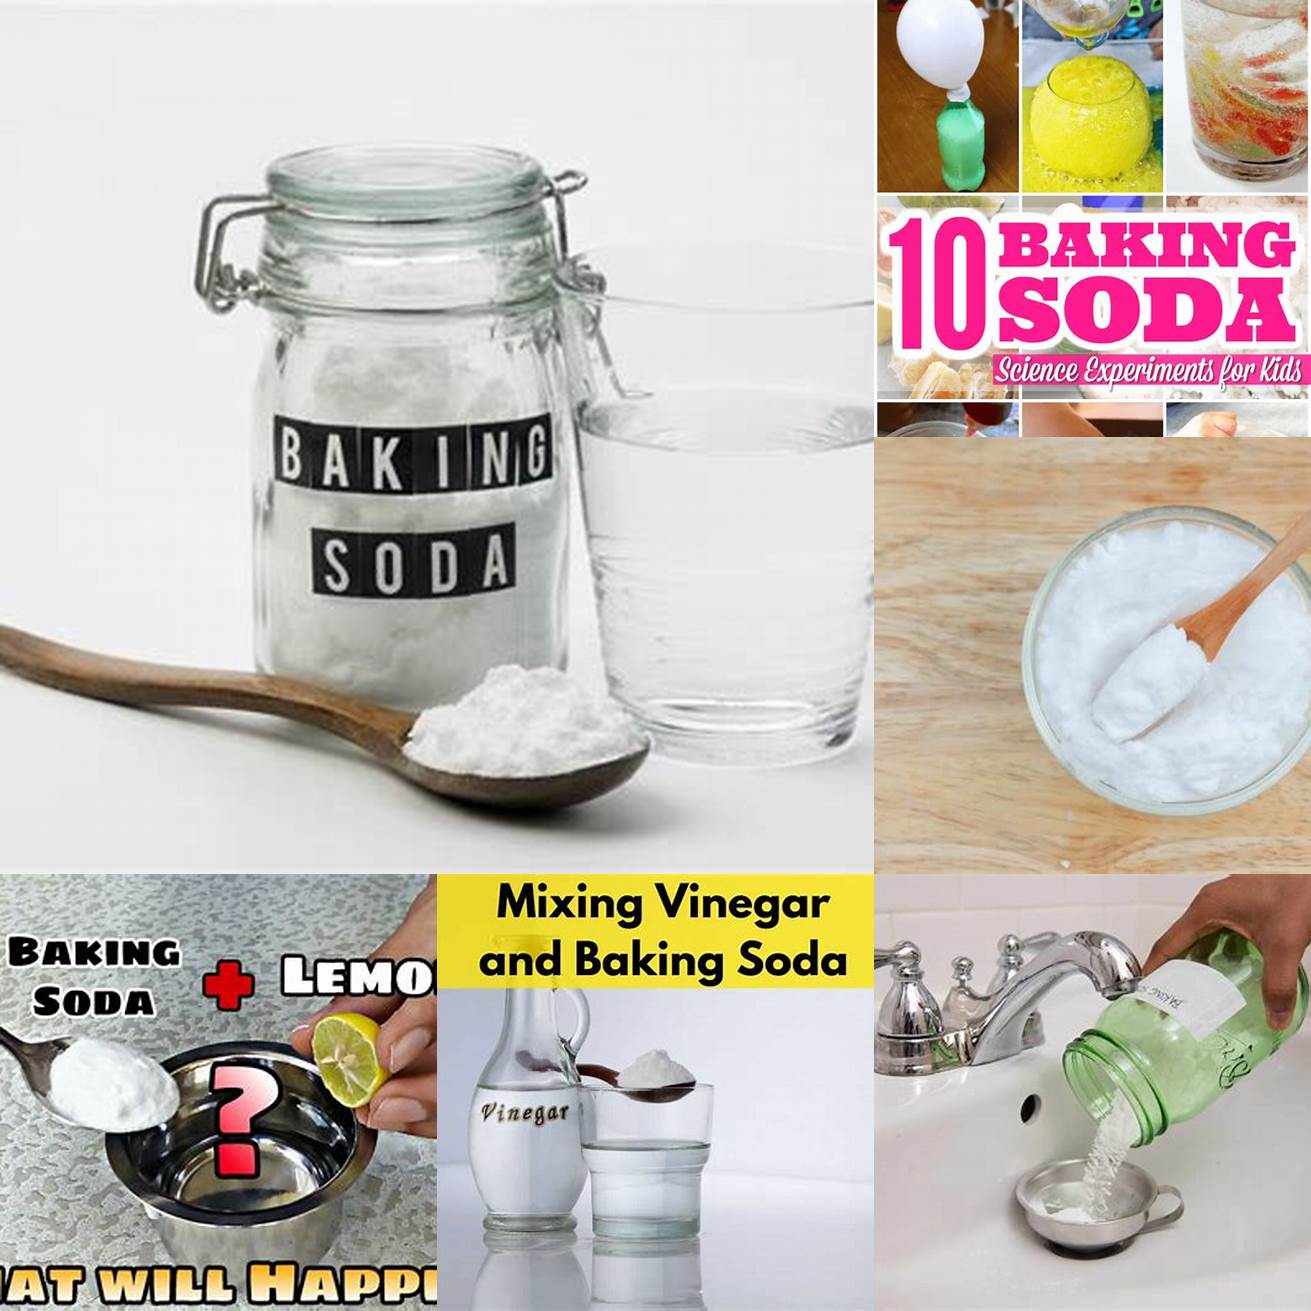 Baking Soda and Water Solution